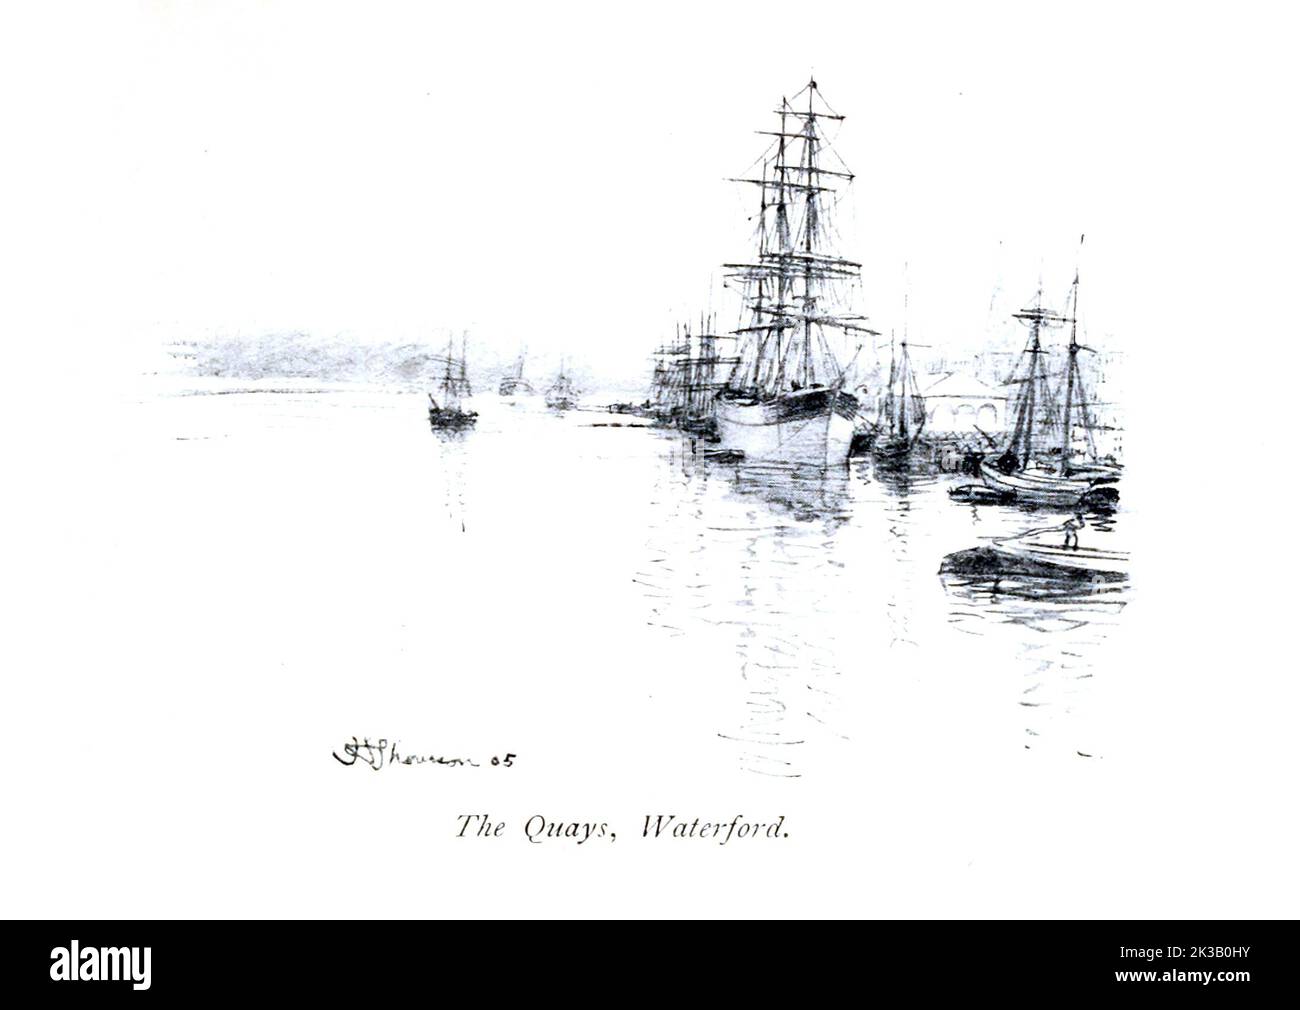 THE QUAYS, WATERFORD illustrated by Hugh Thomson from the book ' The famous cities of Ireland ' by Gwynn, Stephen Lucius, Publisher: Publisher: Dublin, Maunsel & Co., ; New York, The Macmillan Co 1915 Stock Photo